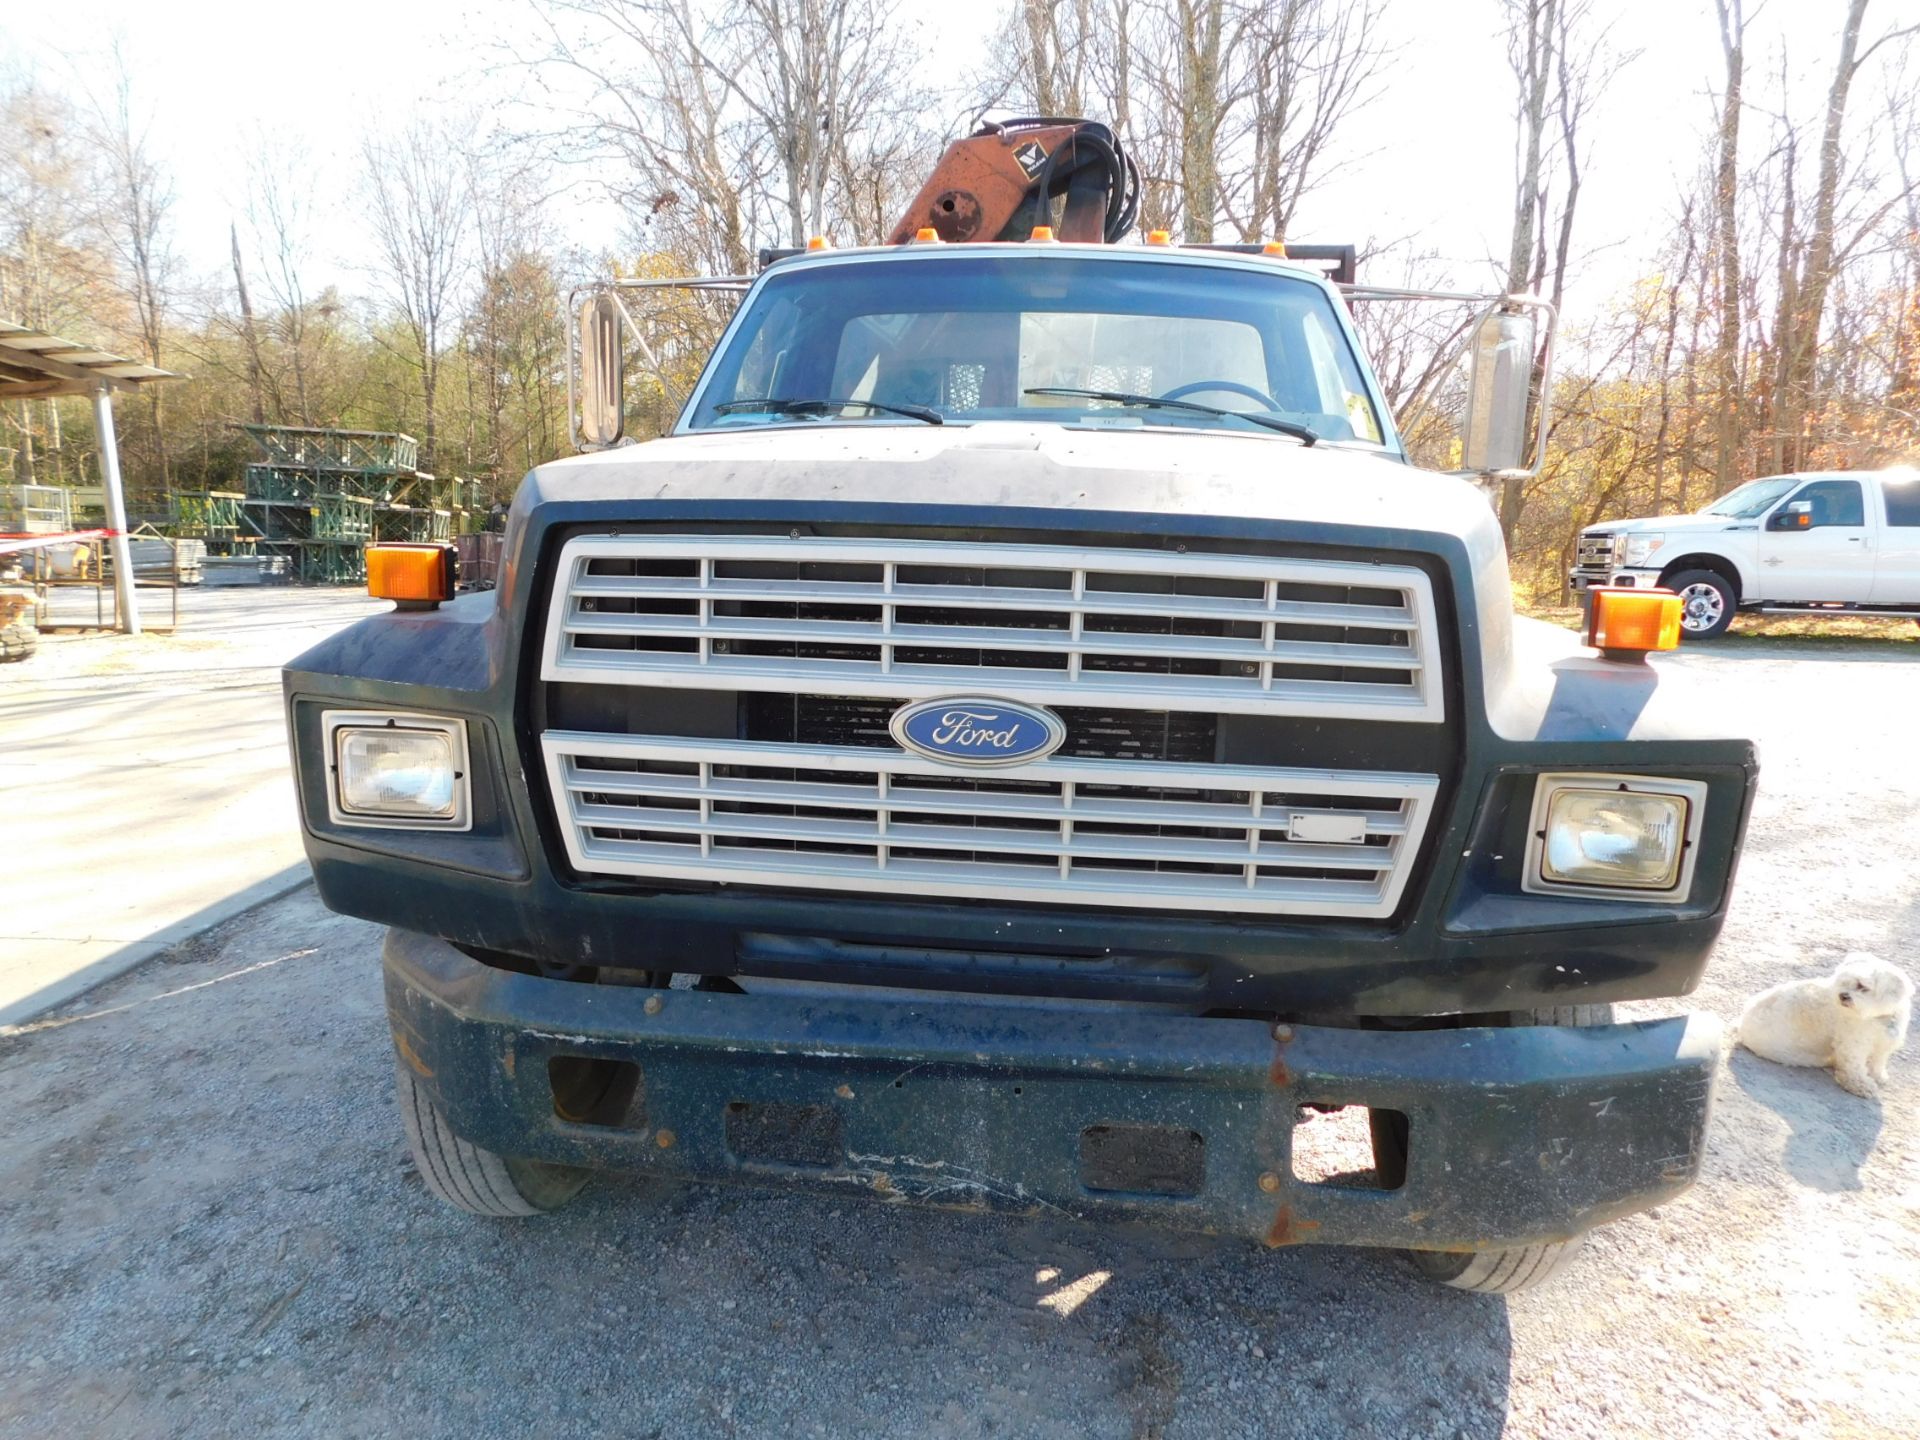 1993 Ford F700 Single Axle Boom Lift Truck, VIN 1FDNK74C0PVA27527, 5-Speed Manual Trasnsmission, - Image 5 of 33